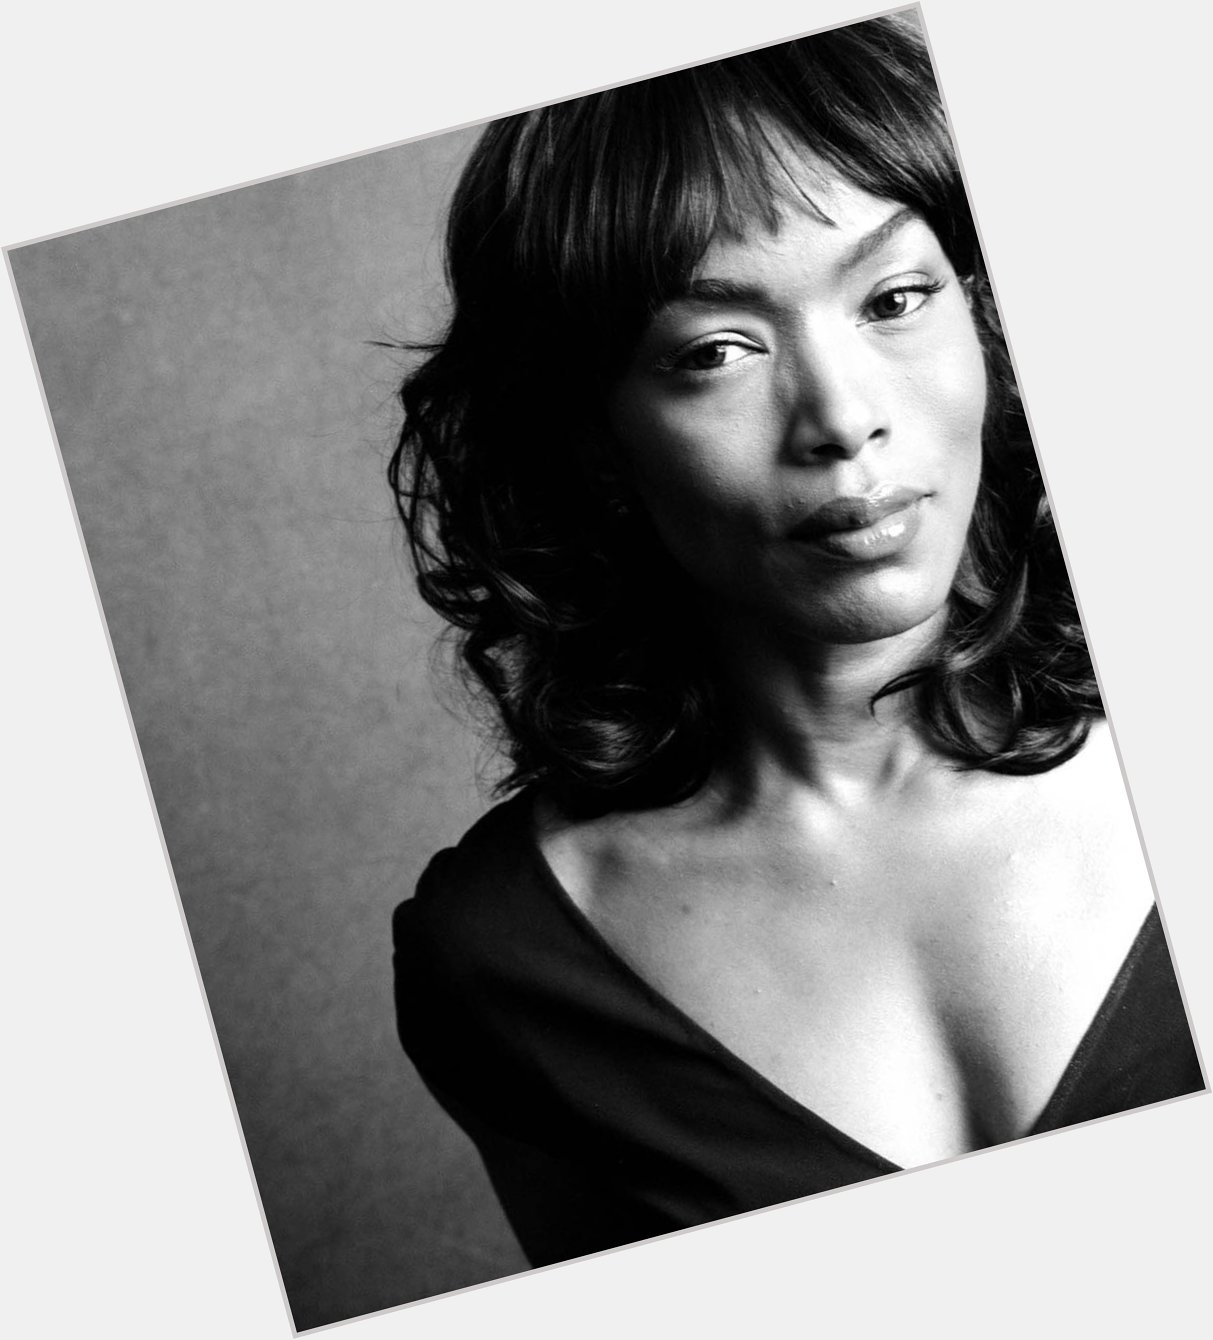 60 who? happy birthday Angela Bassett, i have so much respect for this incredible woman 